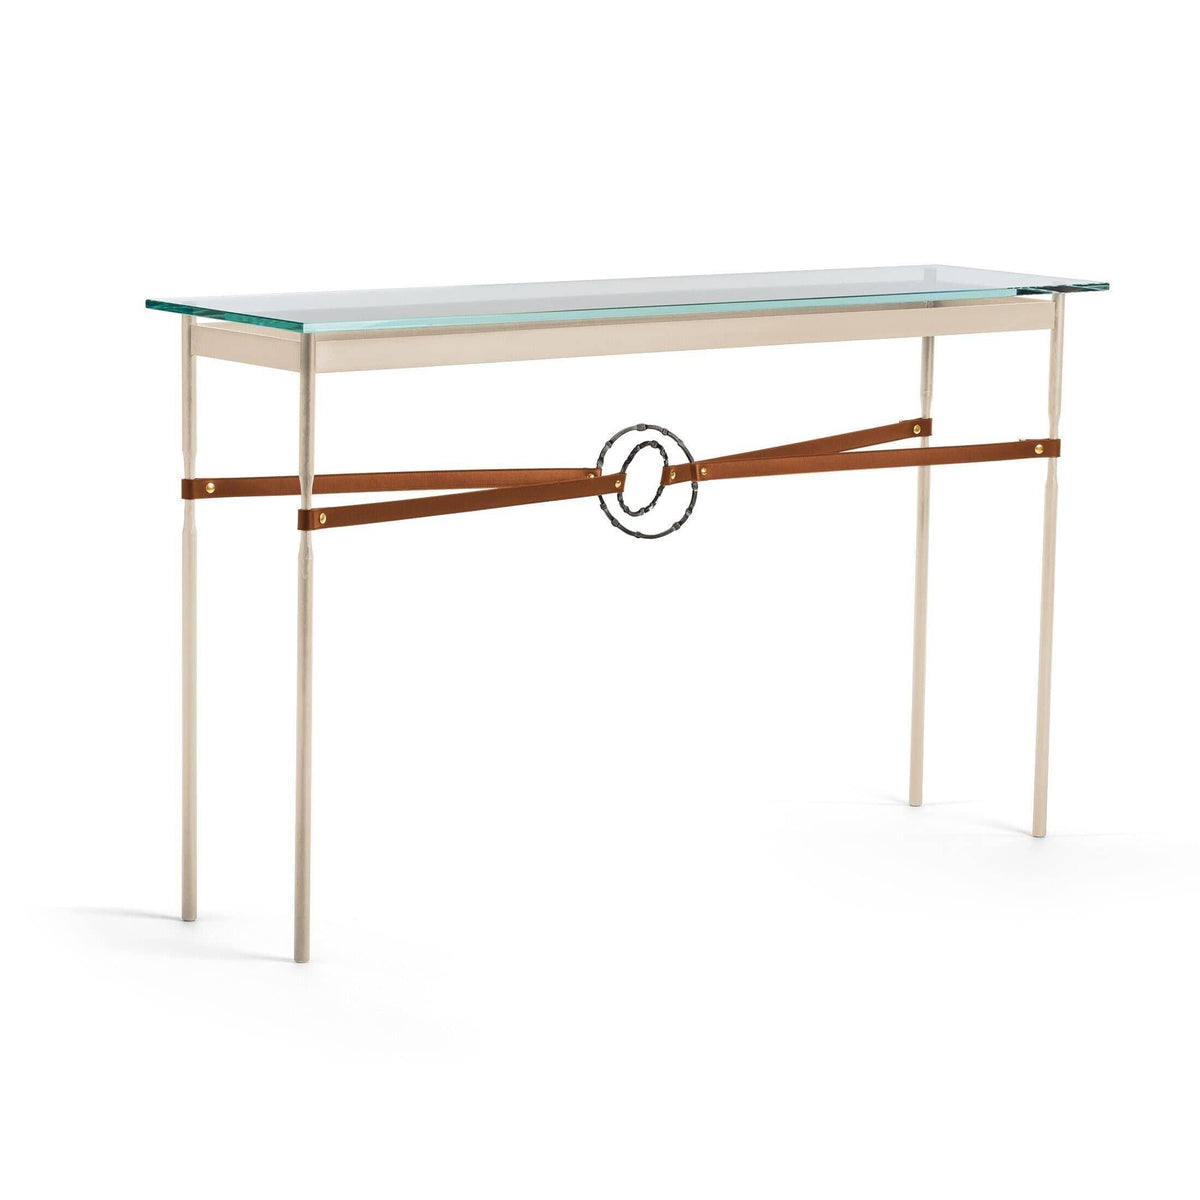 Hubbardton Forge - Equus Chestnut Leather Console Table - 750118-84-07-LC-VA0714 | Montreal Lighting & Hardware